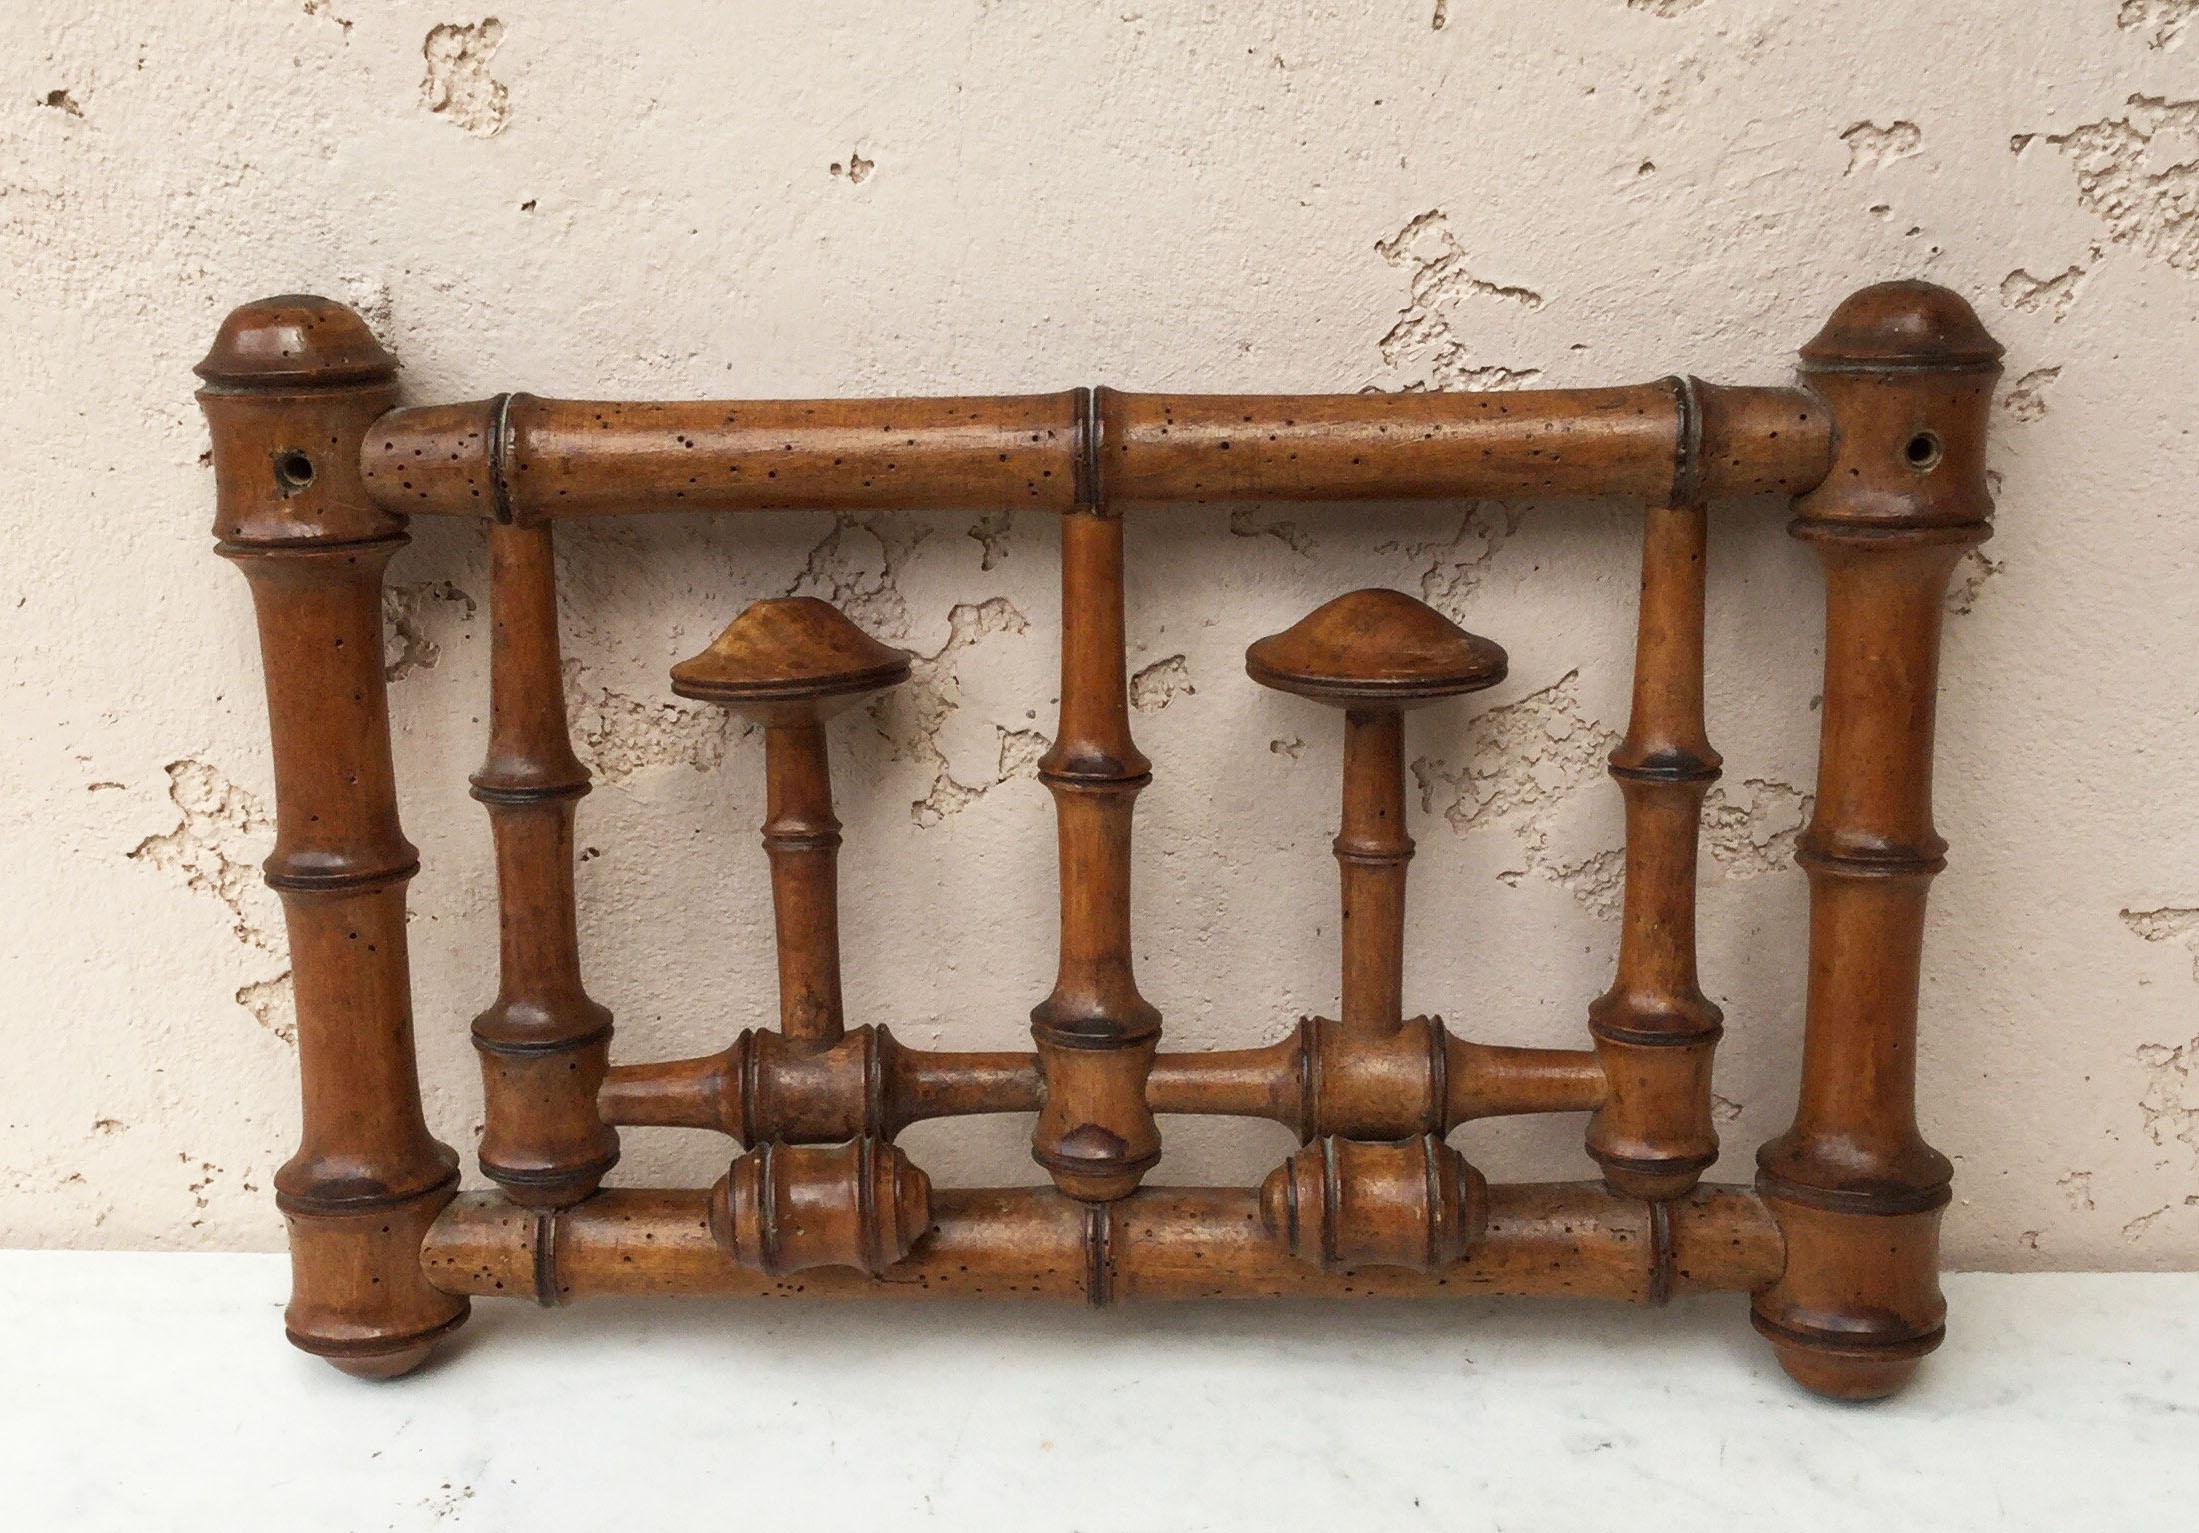 Faux bamboo coat rack circa 1900 with 2 hooks.